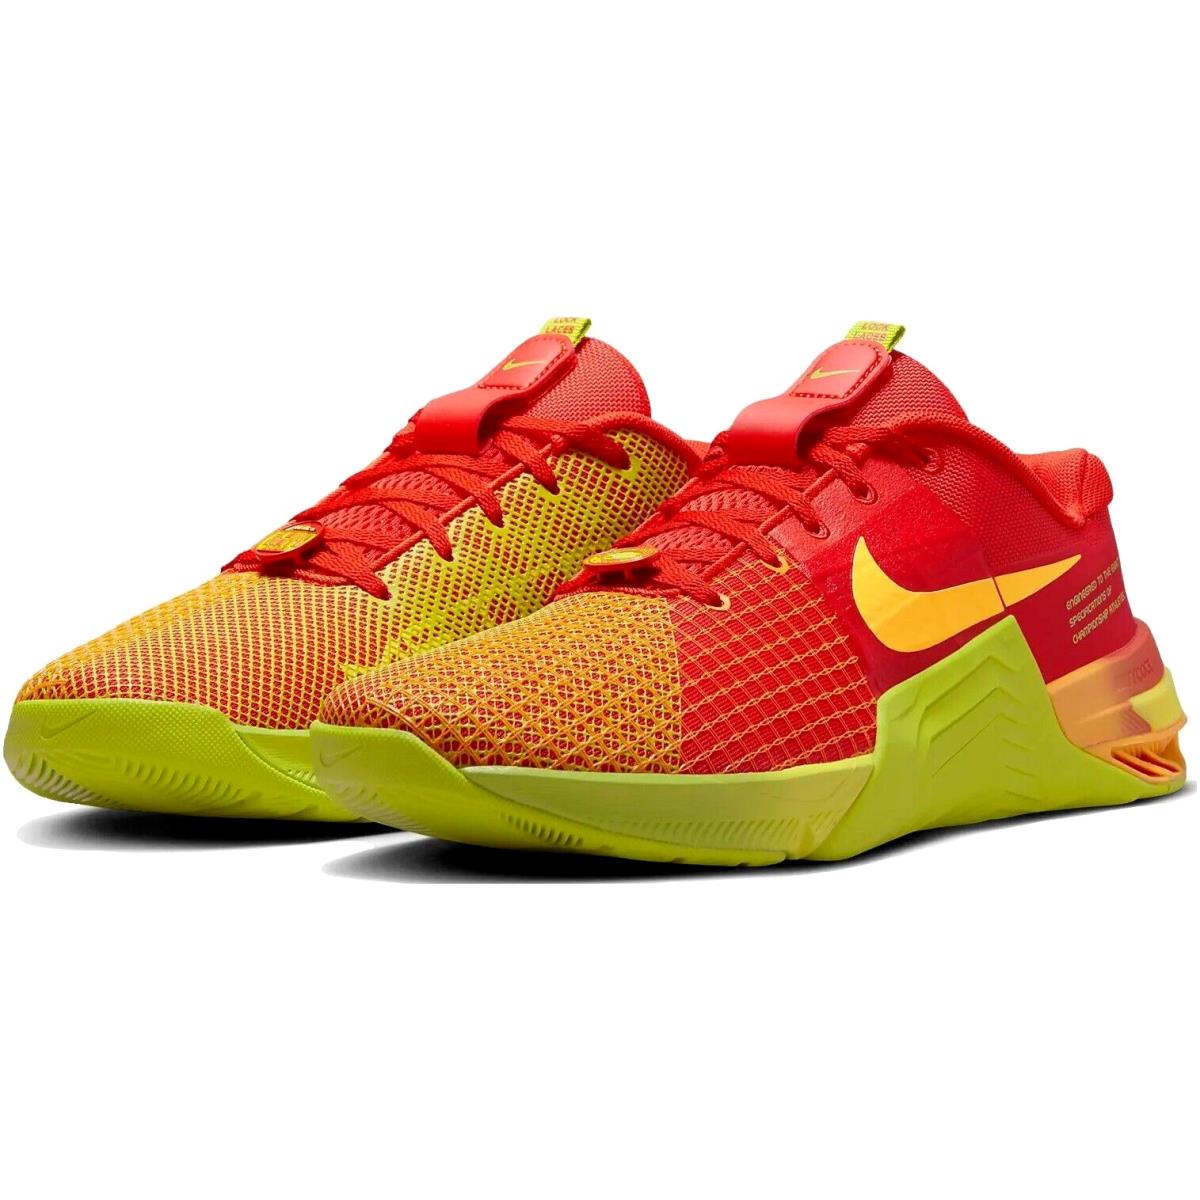 Nike Mens Metcon 8 Amp Training Shoes DV9019 600 - PICANTE RED/MULTI COLOR